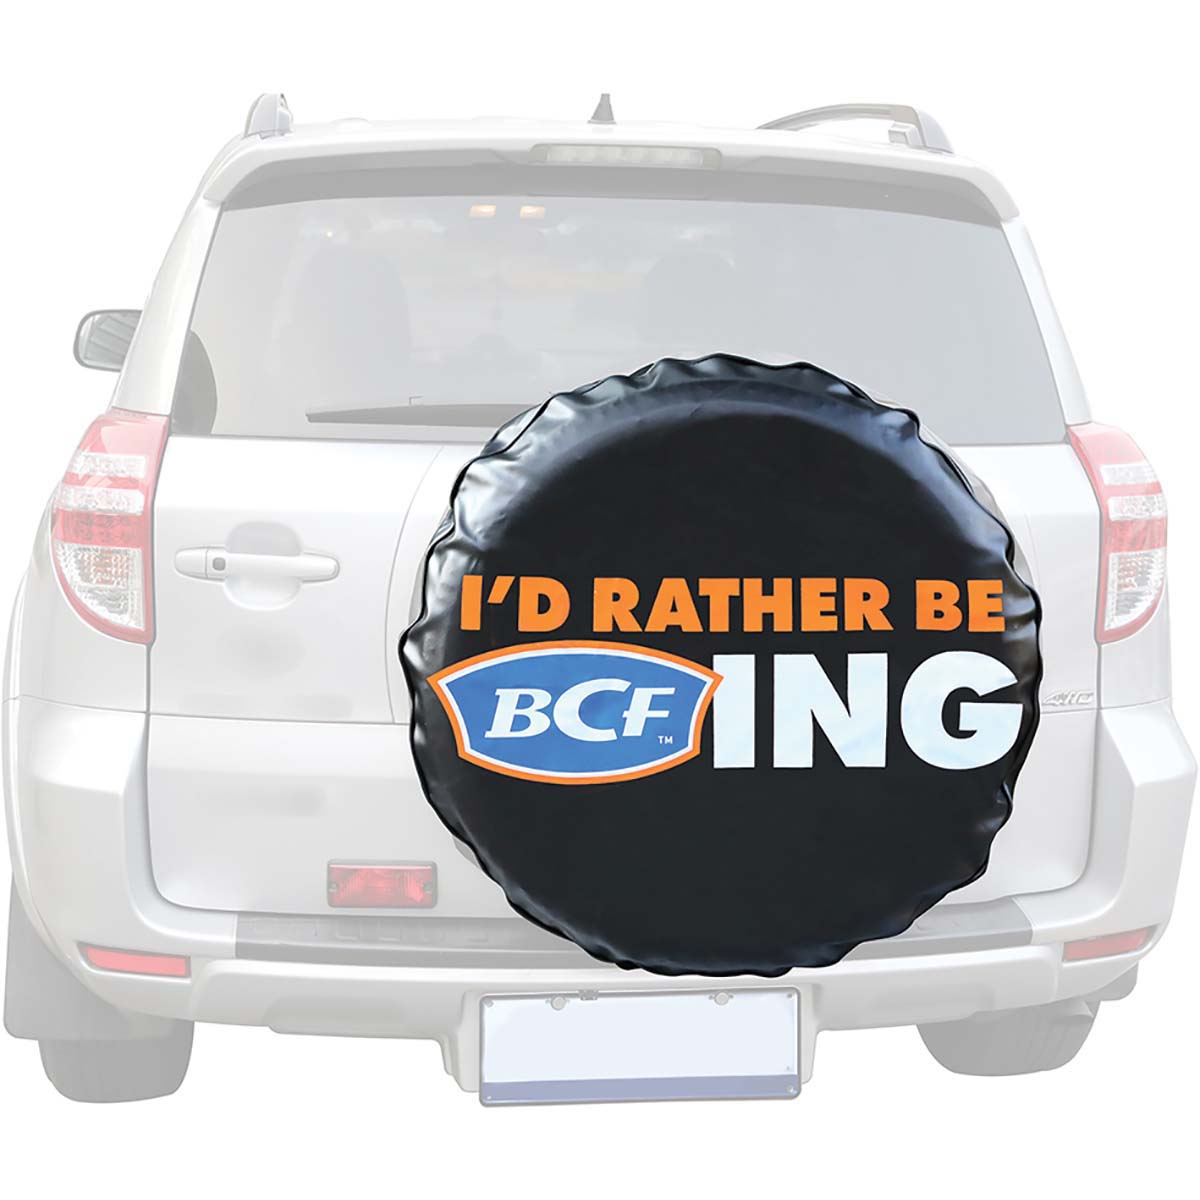 BCF 4WD and Caravan Wheel Cover Large